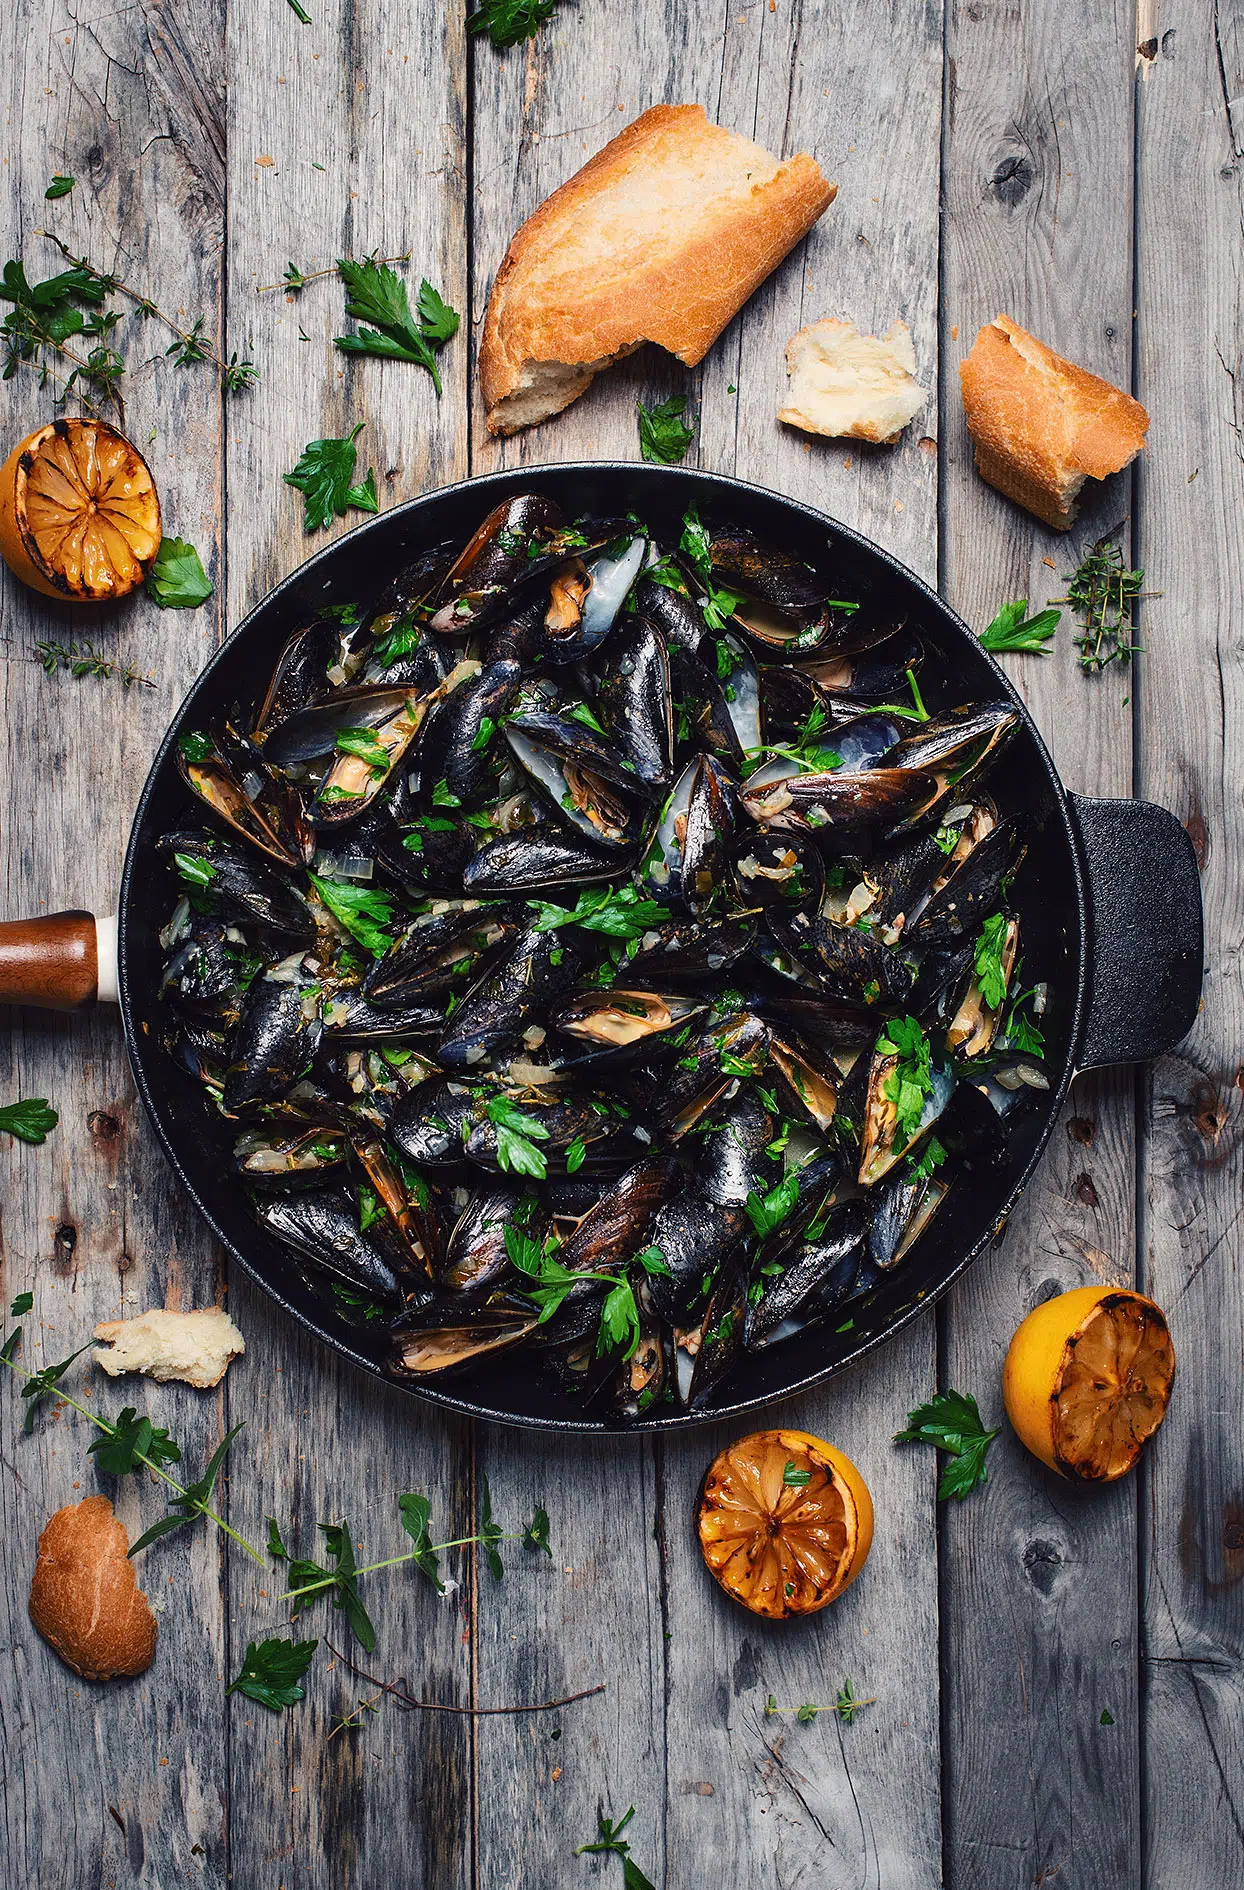 Grilled mussels with IPA beer, lemon and fresh herbs